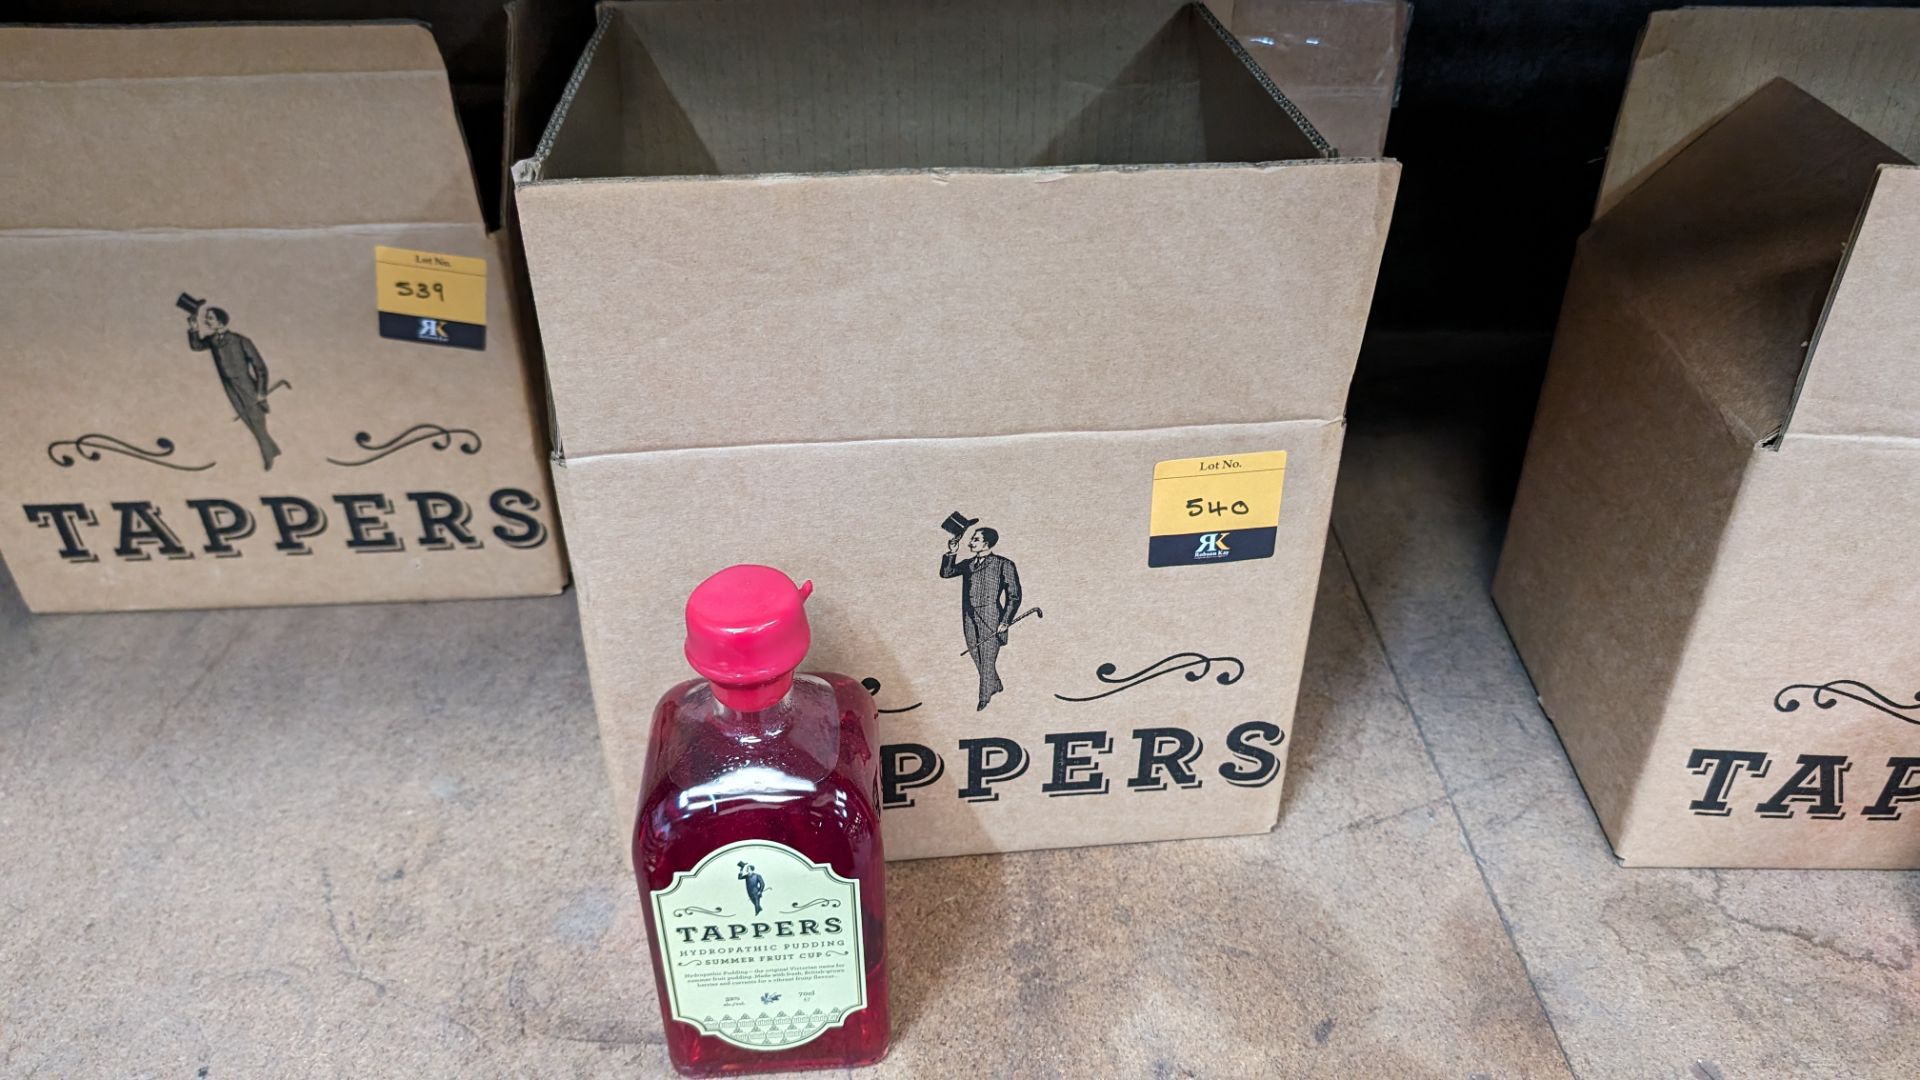 6 off 700ml bottles of Tappers Hydropathic Summer Fruit Cup, 32% ABV. Includes a Tappers presenta